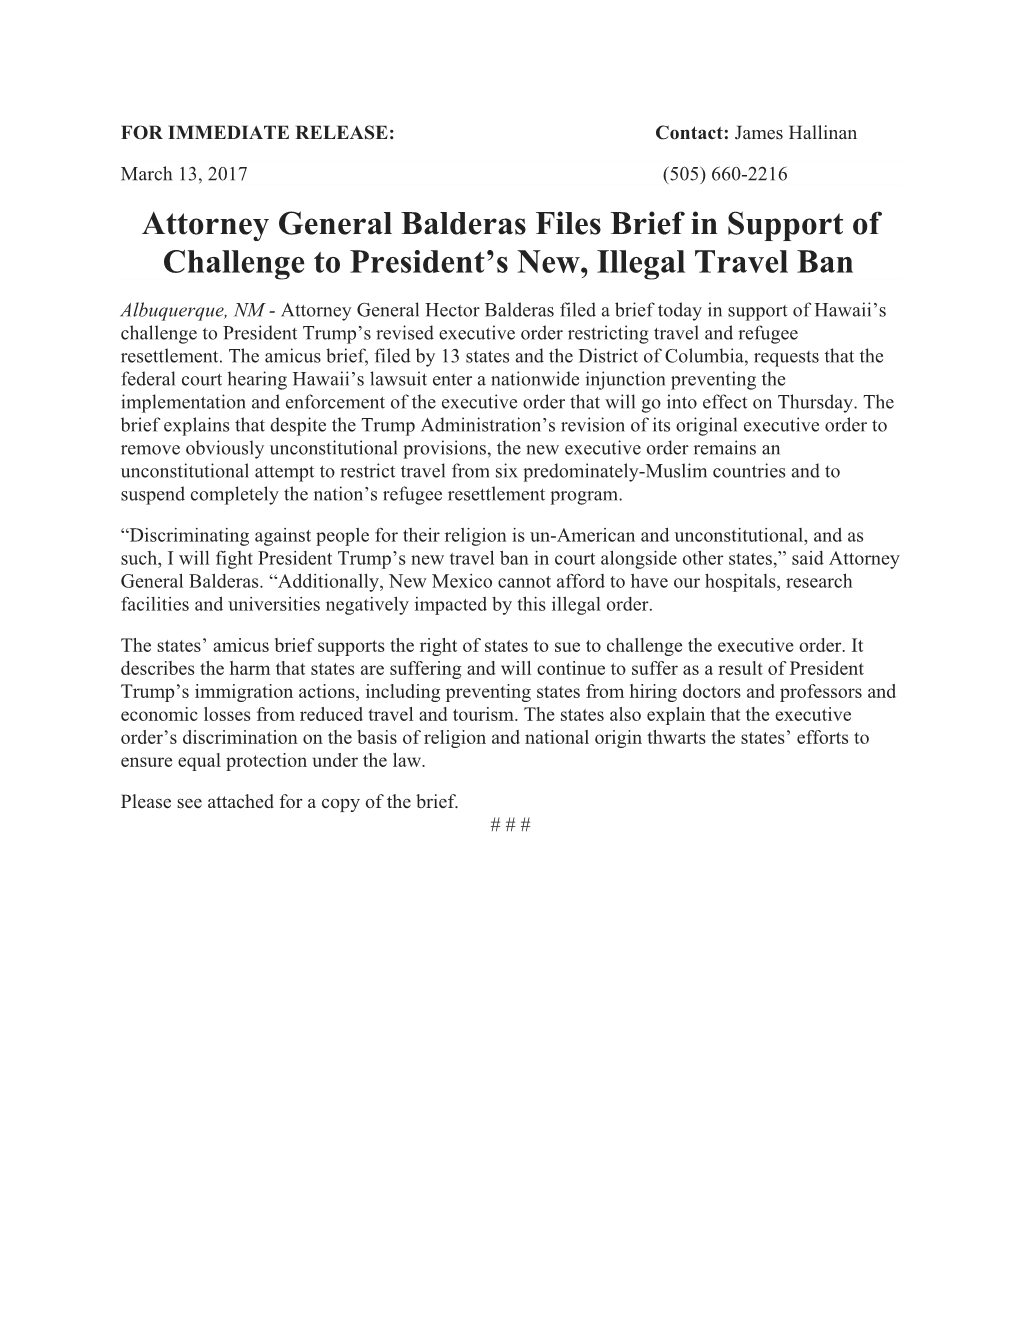 Attorney General Balderas Files Brief in Support of Challenge to President’S New, Illegal Travel Ban